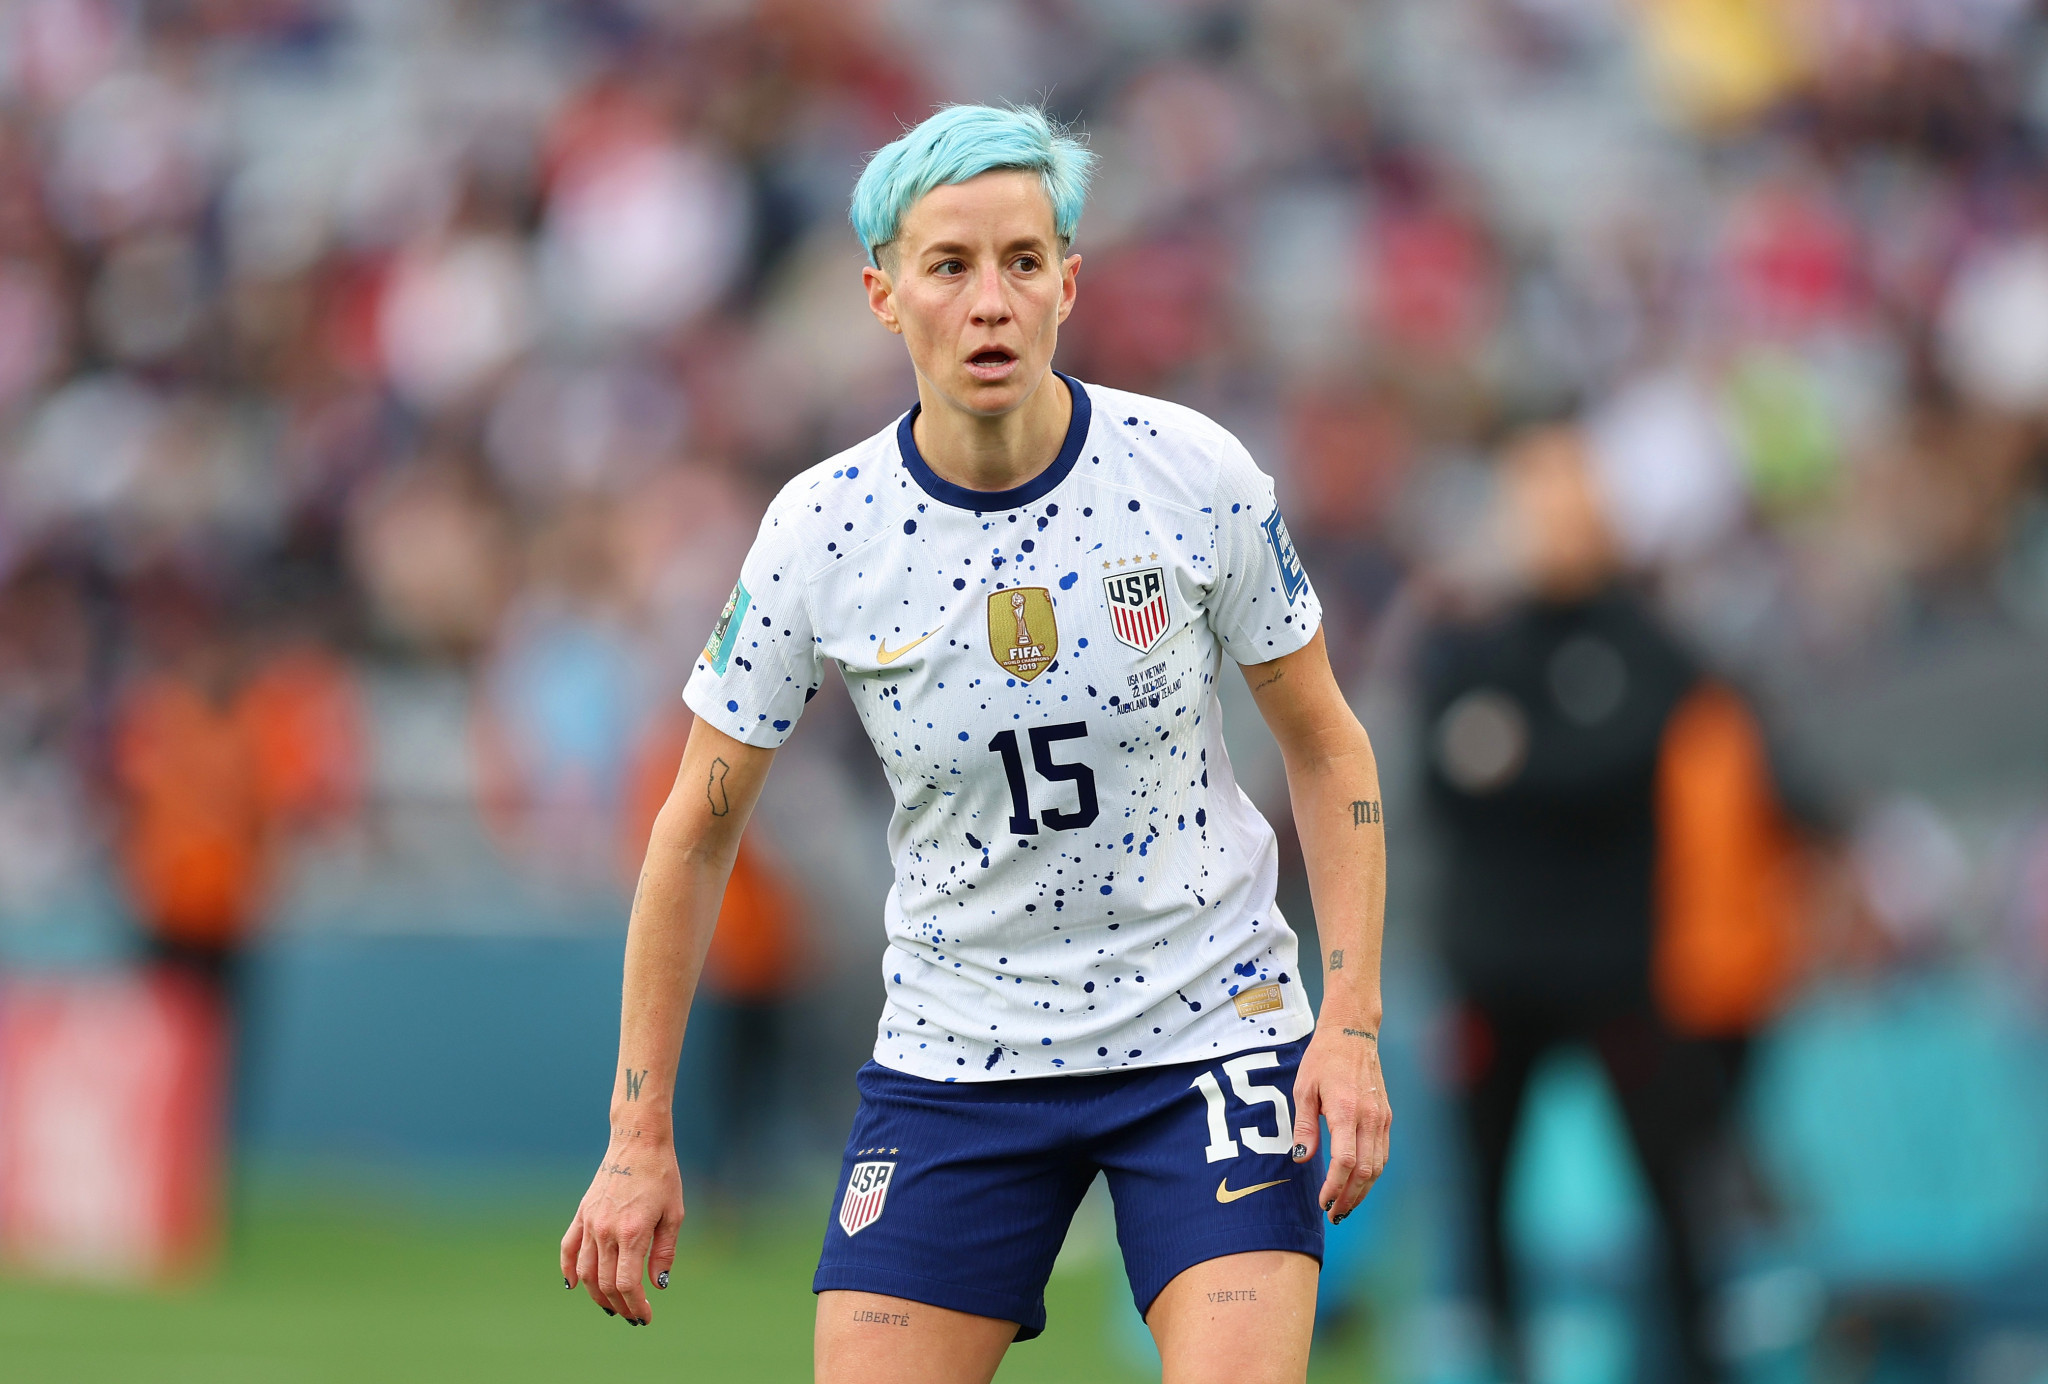 Olympic champion Rapinoe alleged to have "poisoned" US team at Women's World Cup in anthem row